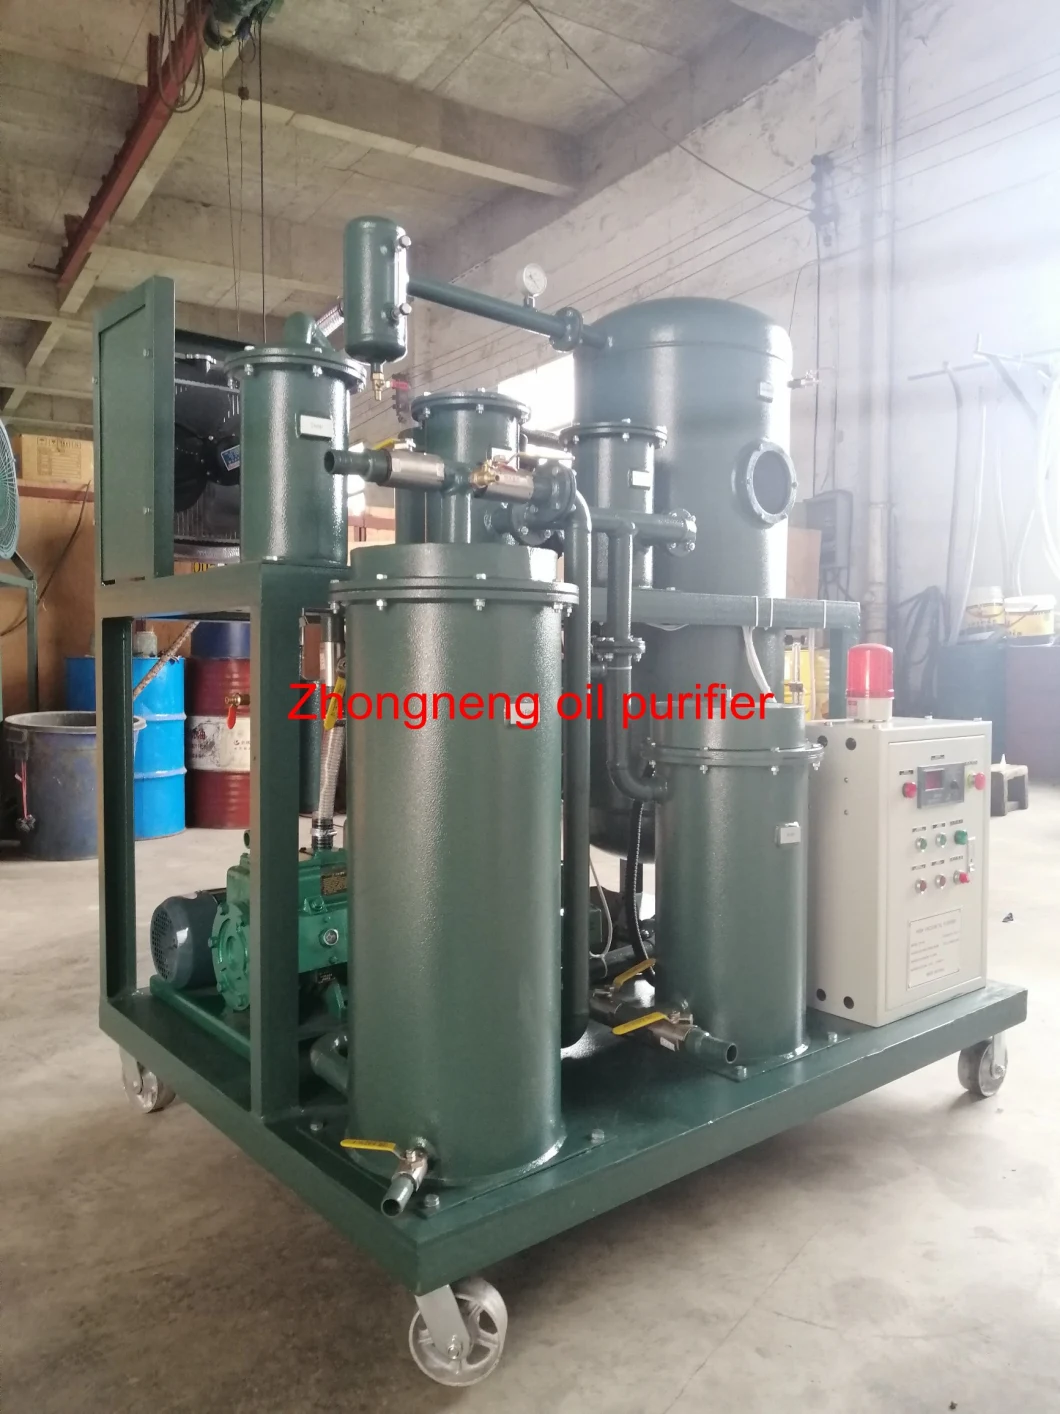 Used Lubrication Oil Purification Unit, Gear Oil Recycling Filtering Plant